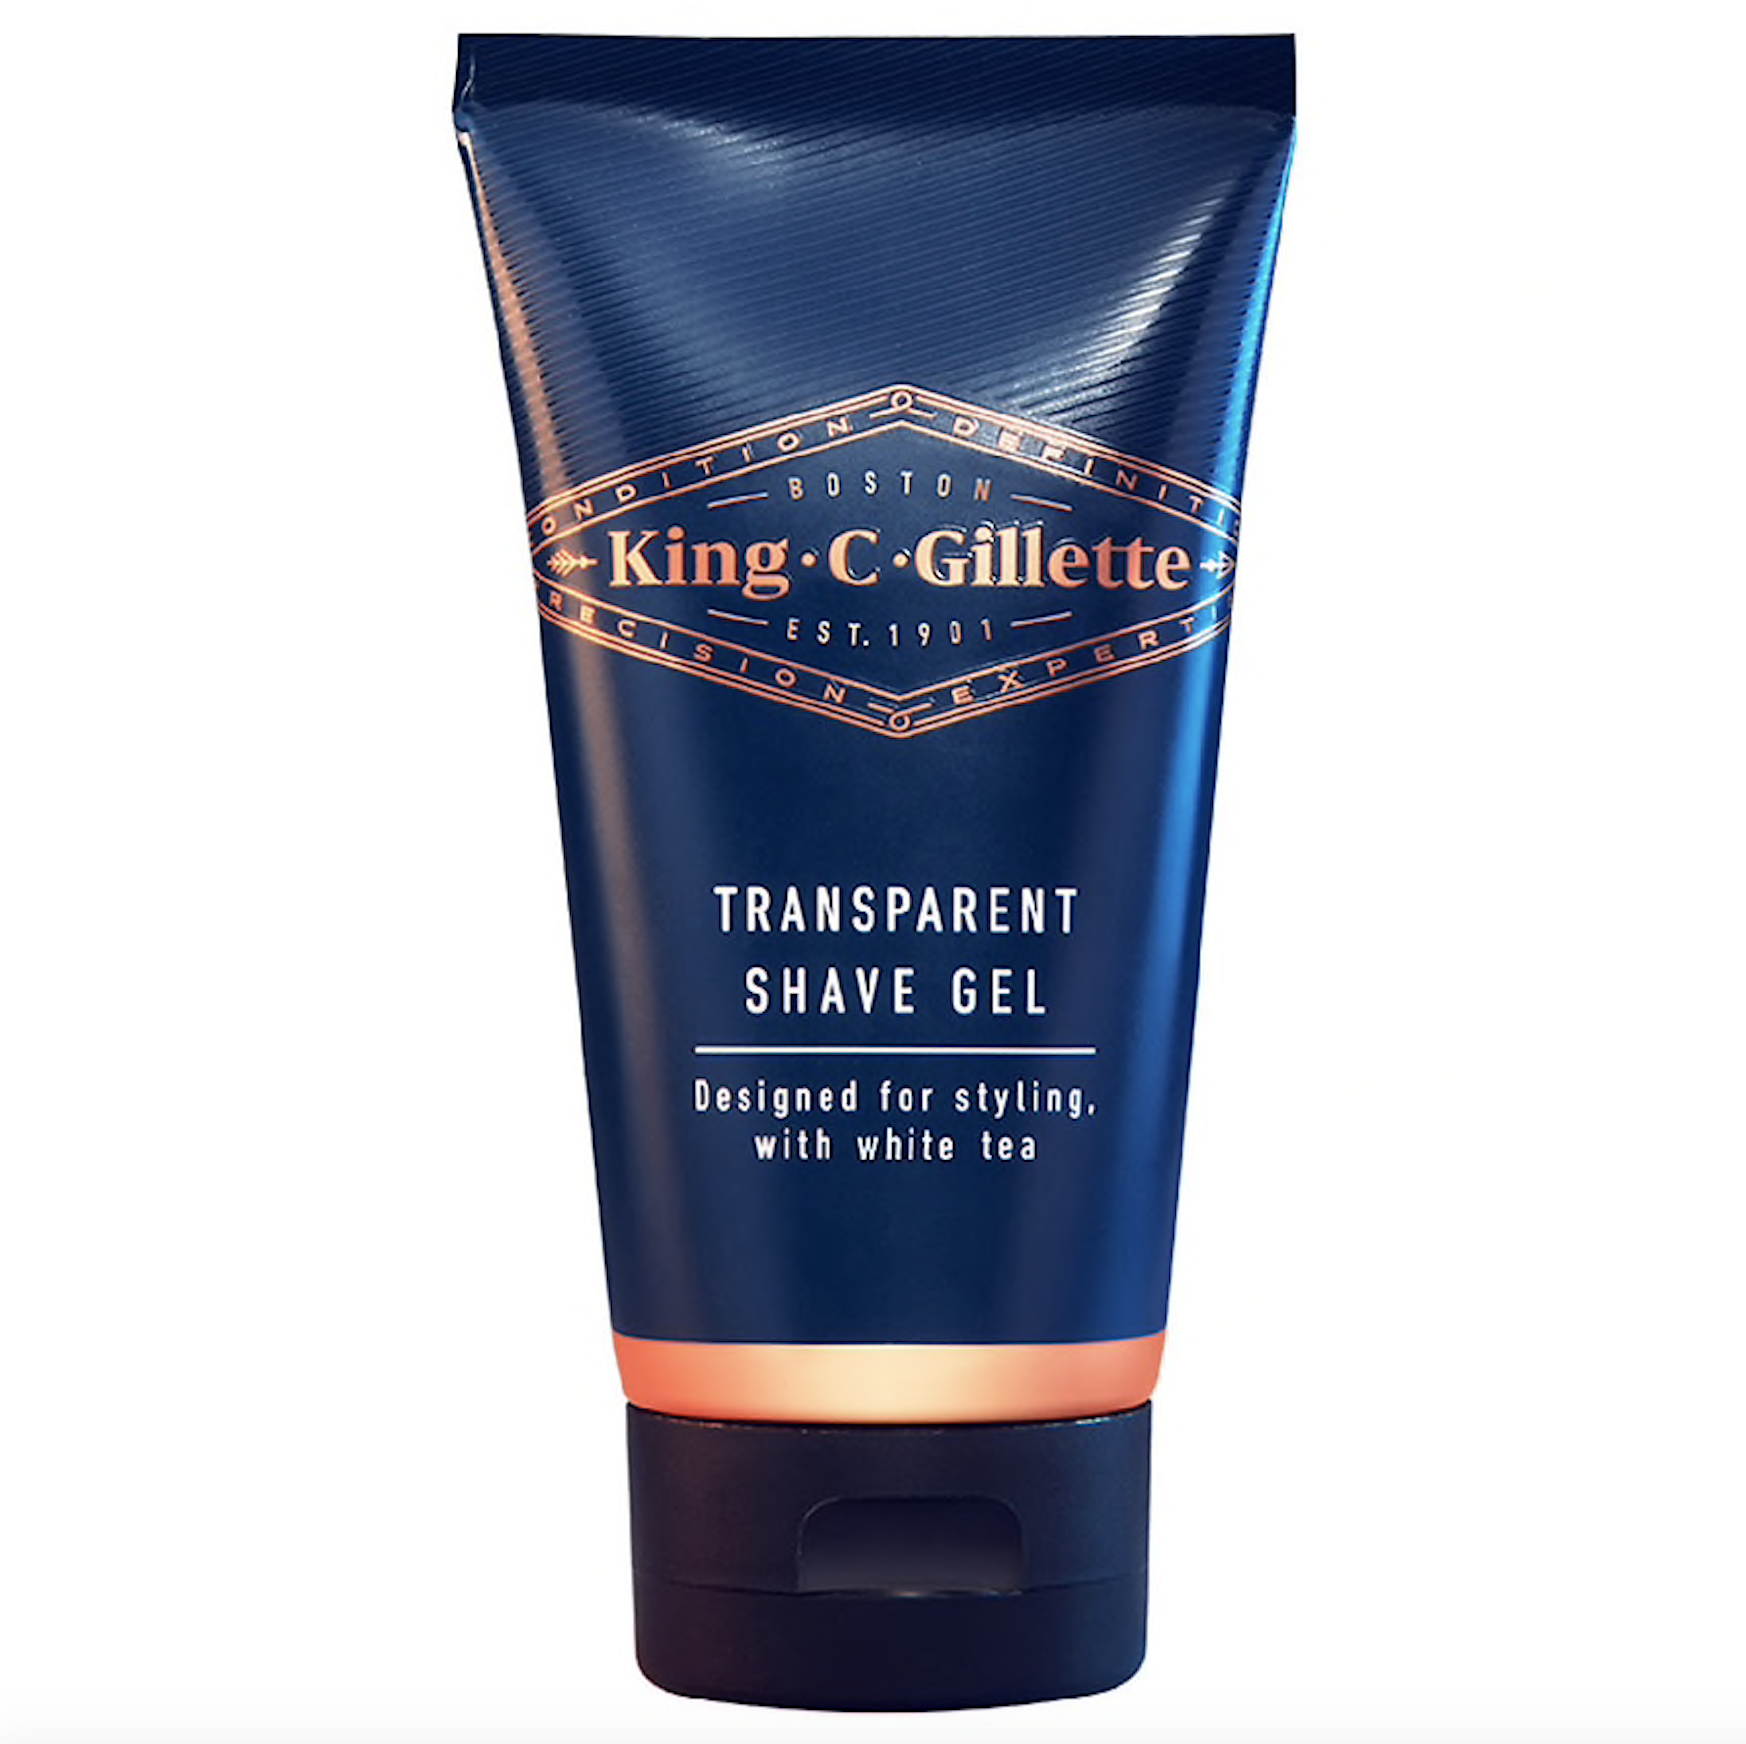 king c gillettemen's transparent shave gel with white tea and argan oil